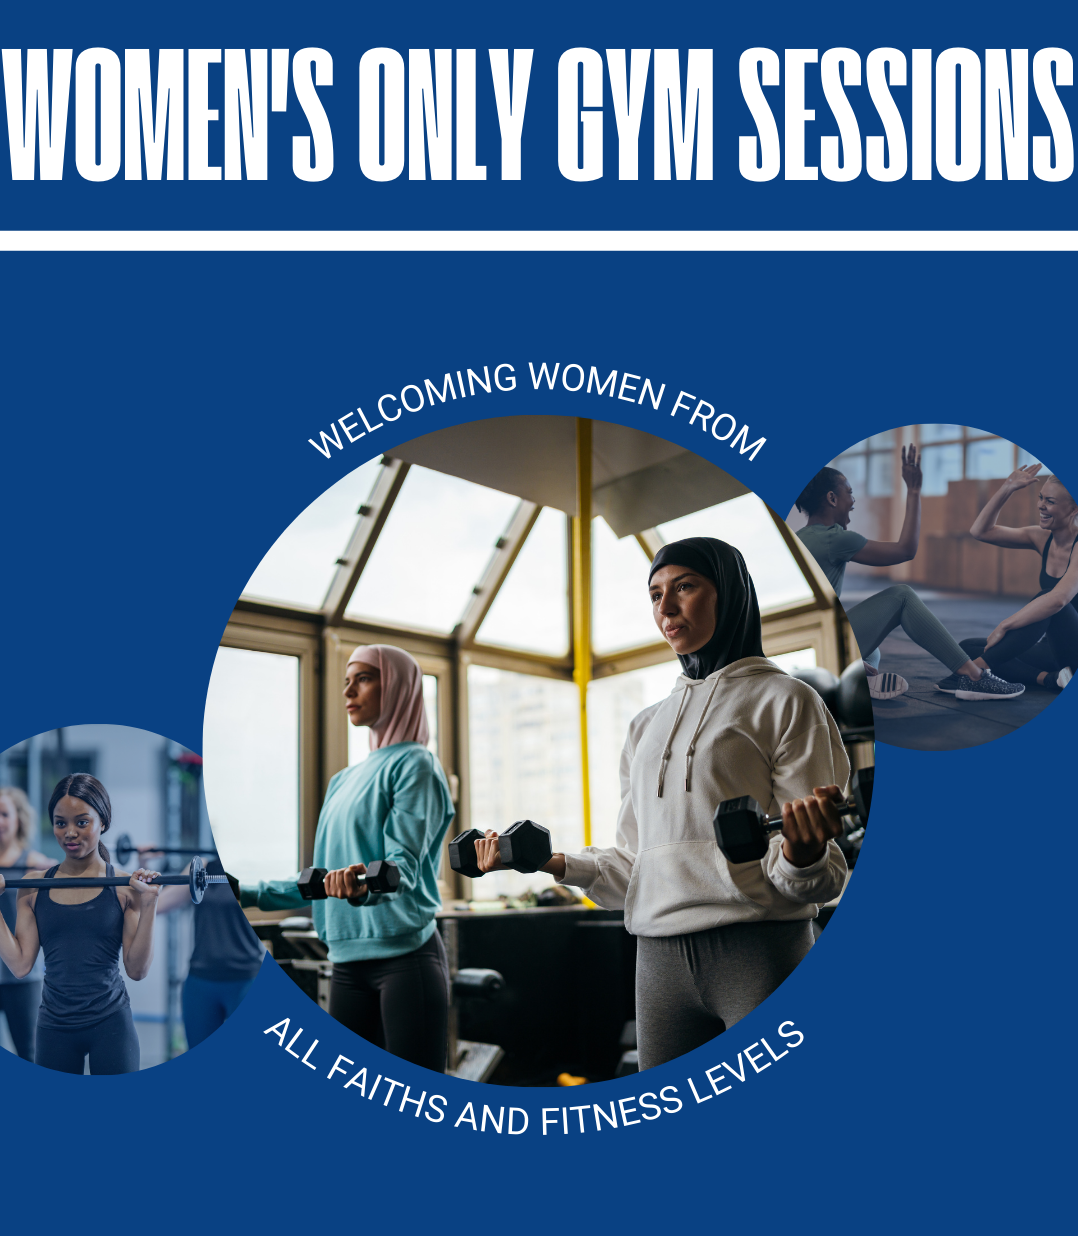 Women's Only Gym sessions